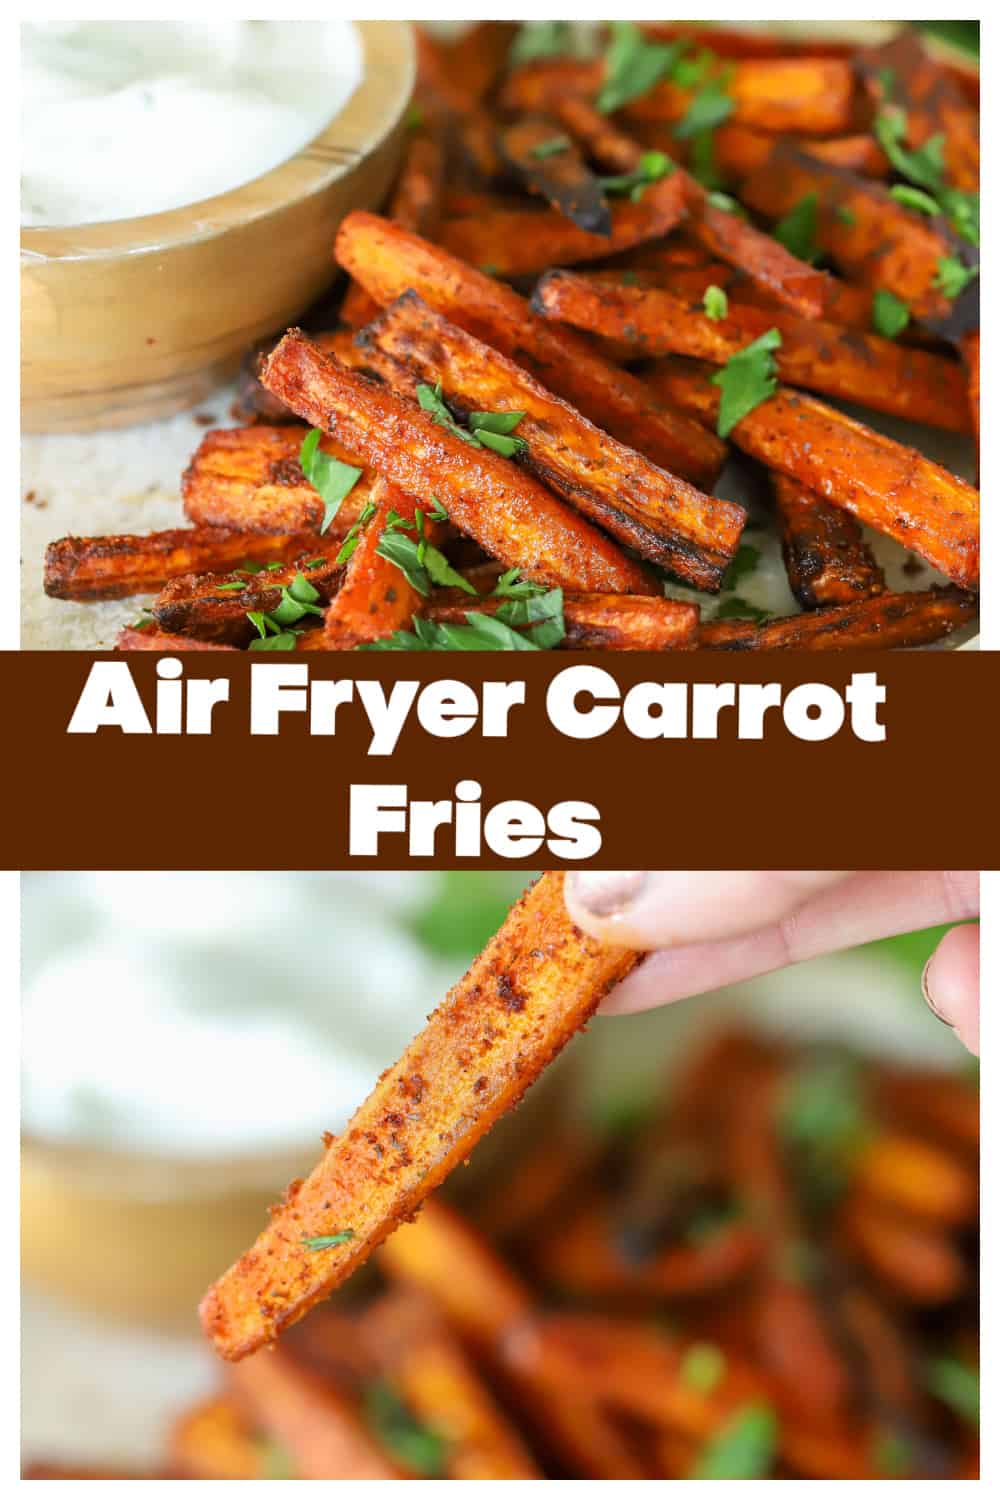 Want a new, fun way to eat your vegetables? These Air Fryer Carrot Fries are it! Healthy, gluten free, easy and absolutely delicious. via @jennikolaus